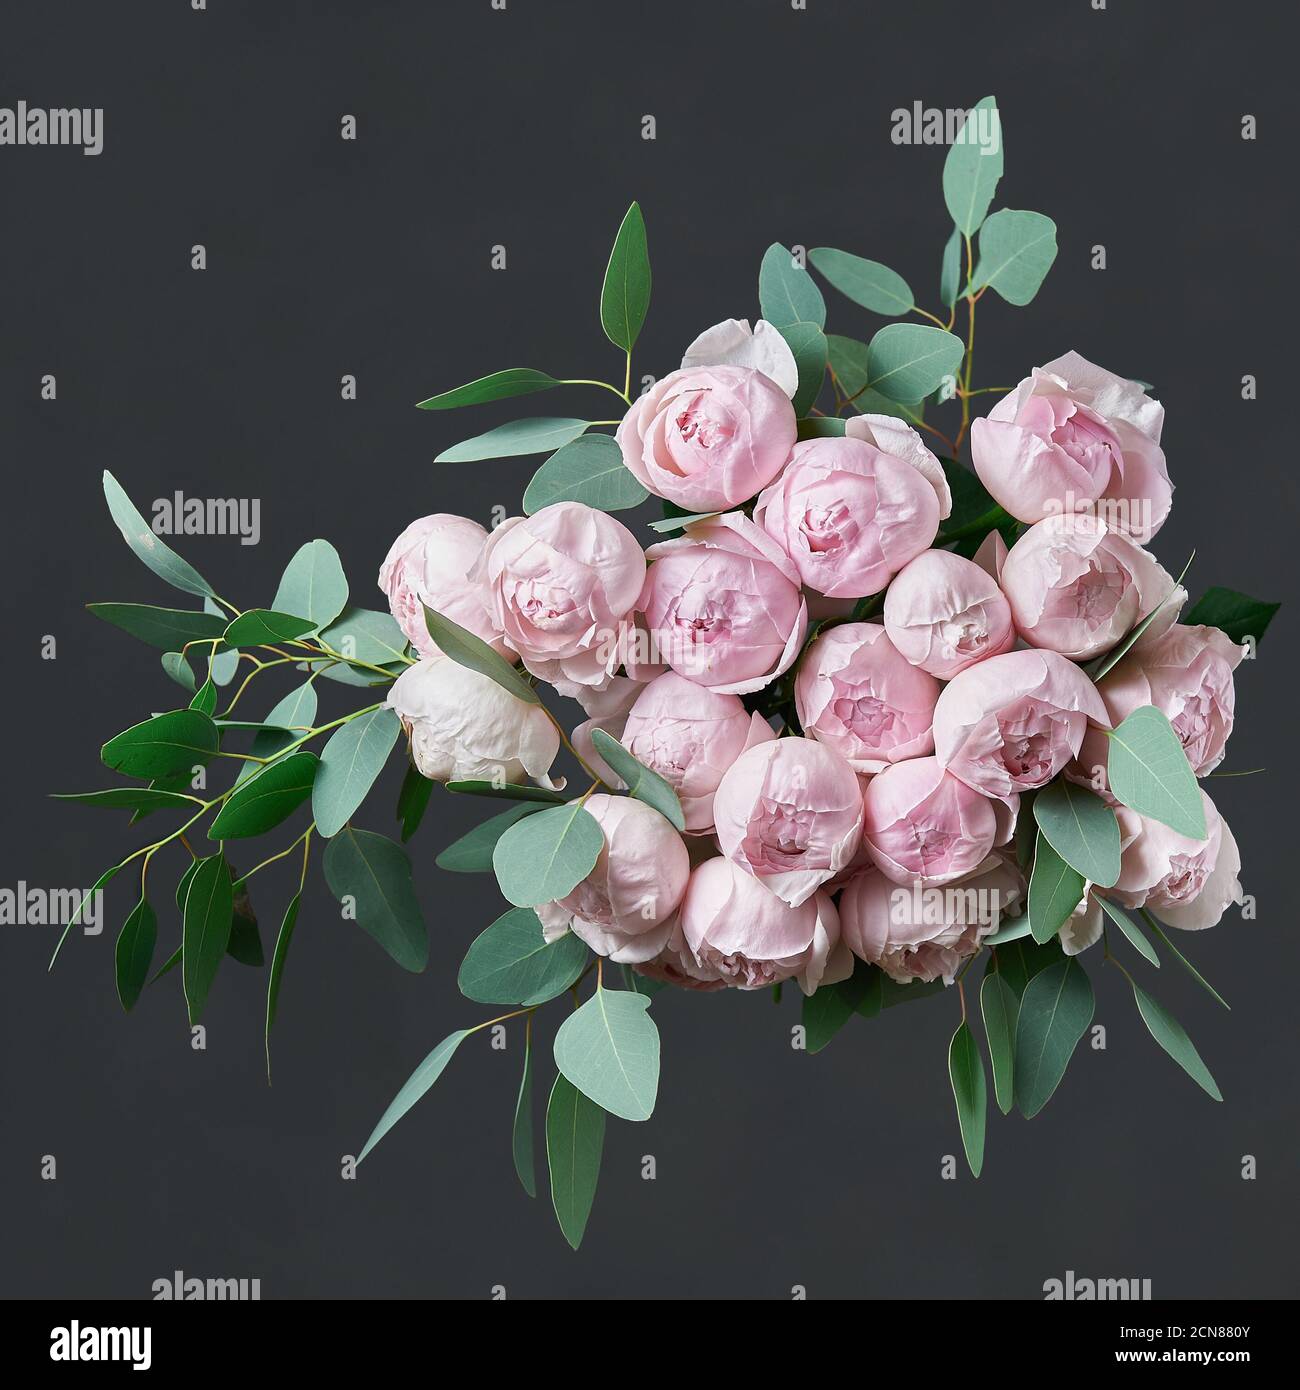 Beautiful bouquet of flowers with pink roses and green eucalyptus leaves. Stock Photo